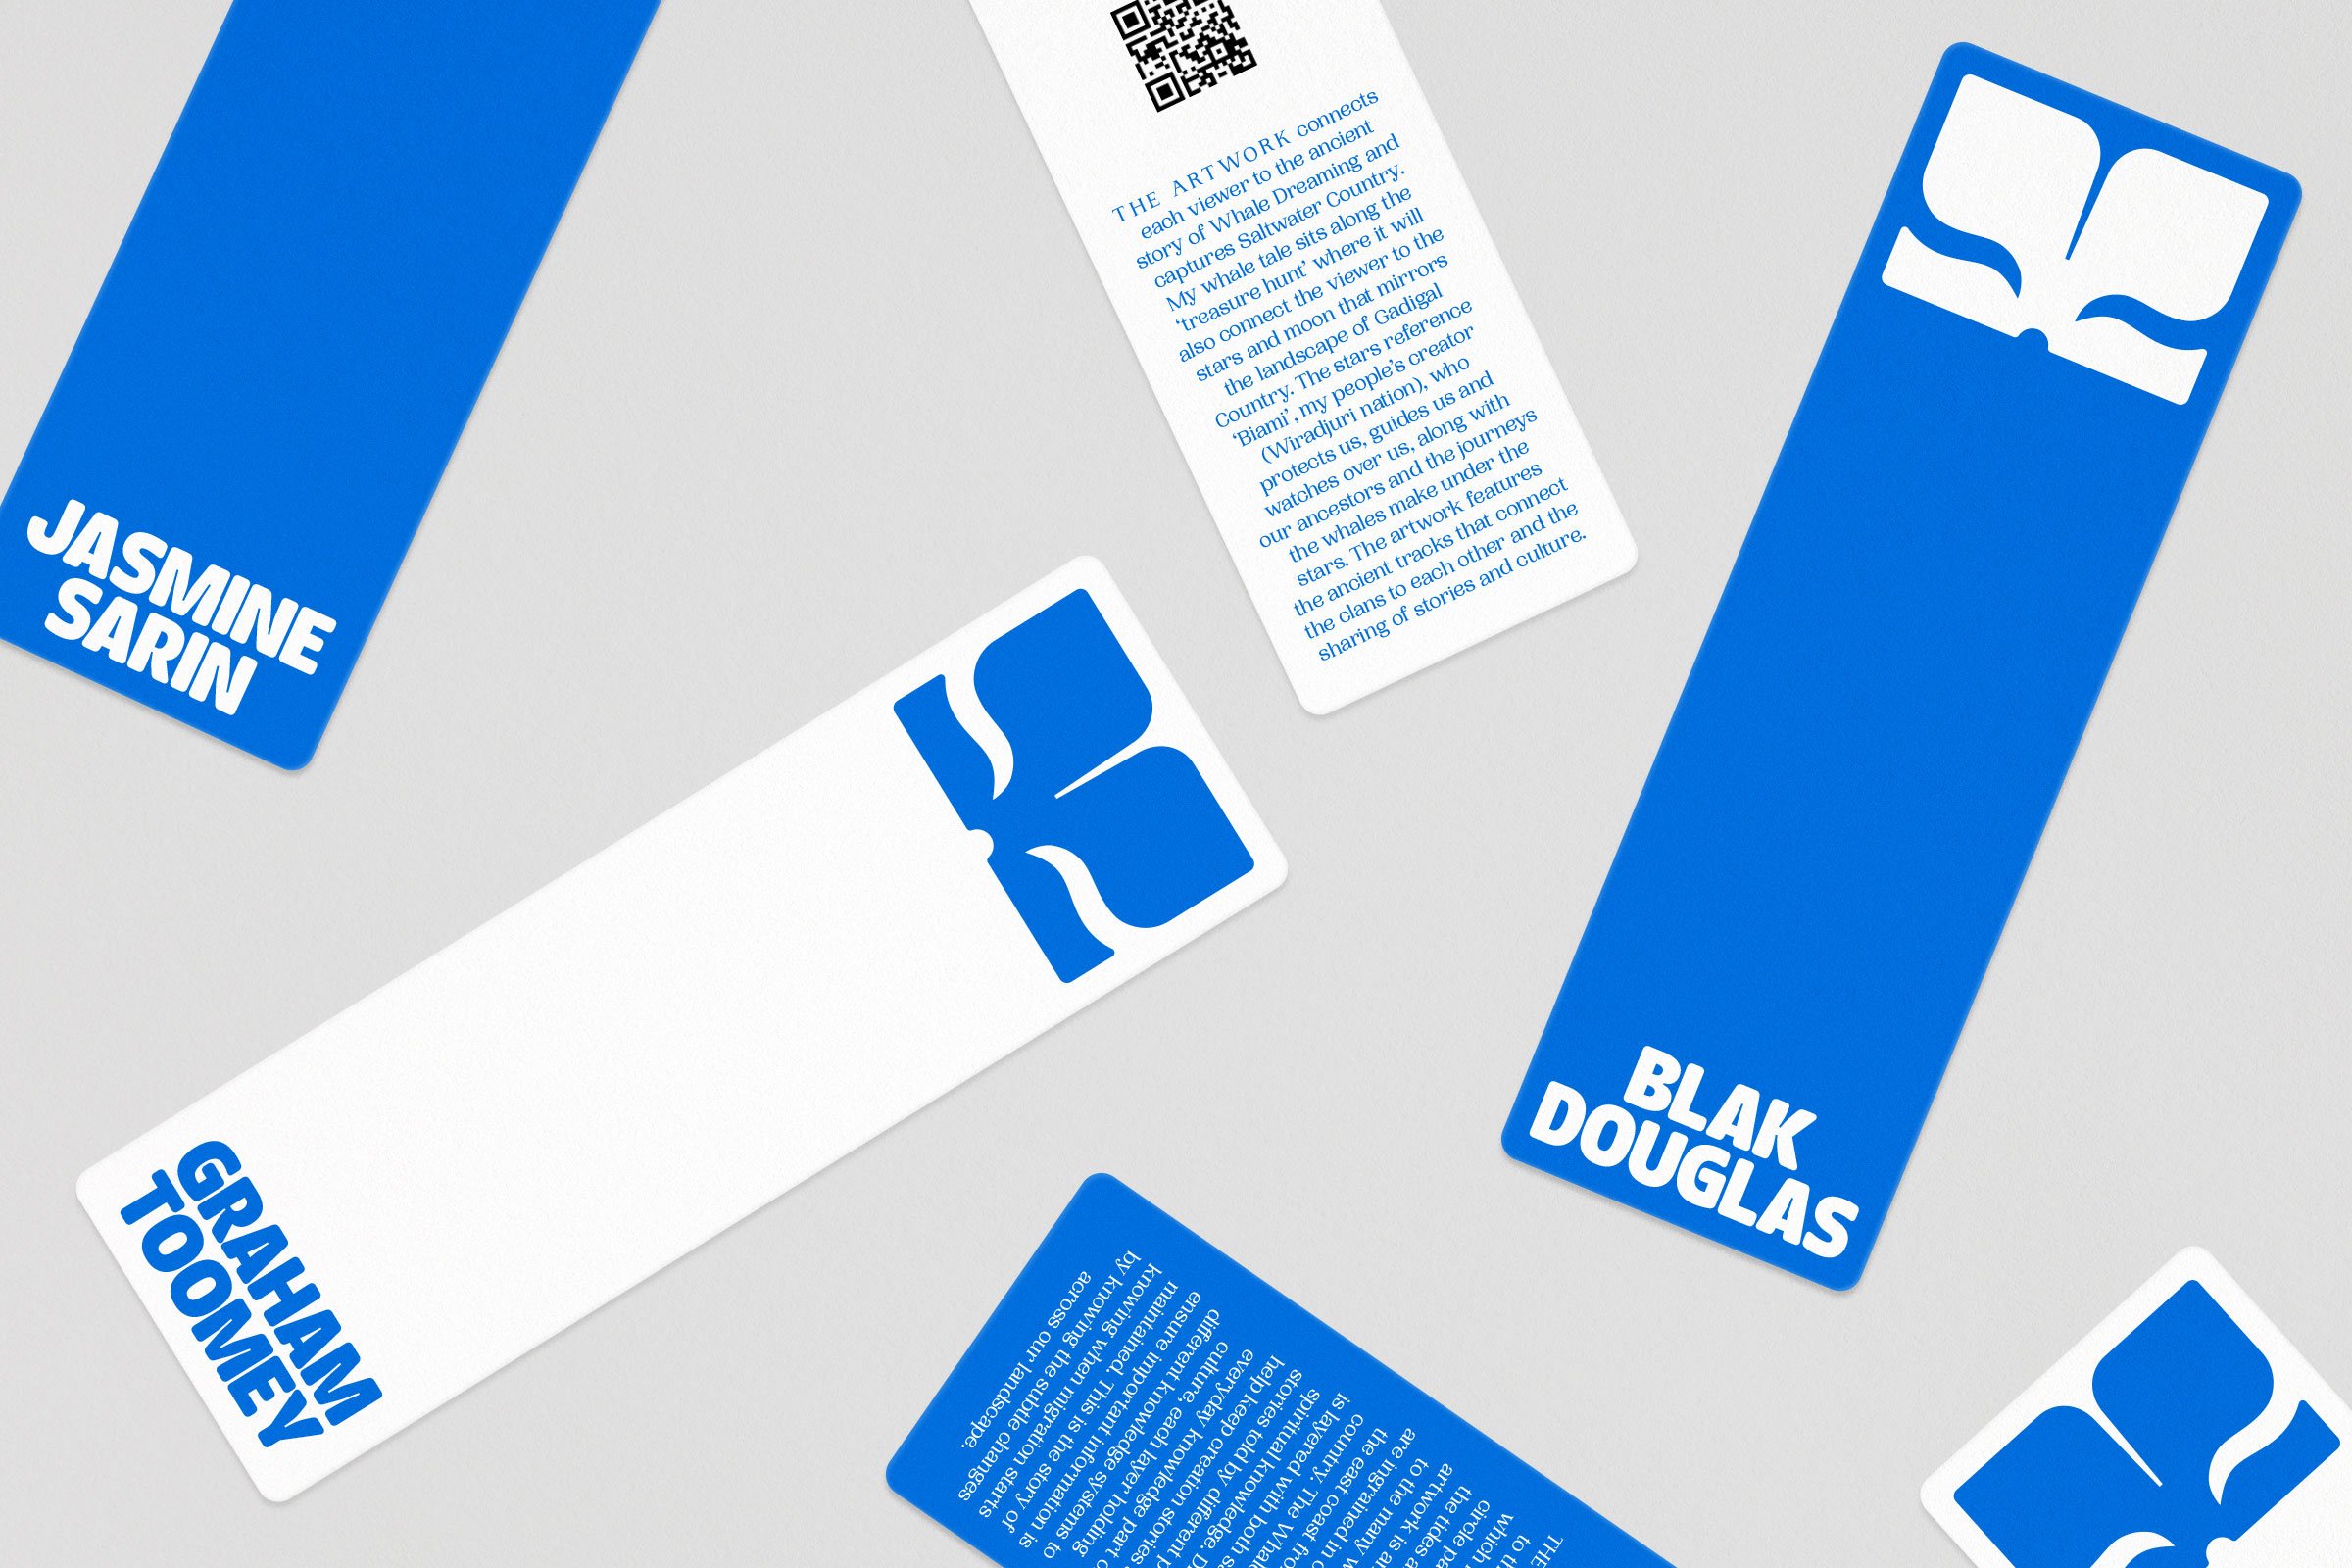 Logo and bookmark design for waterfront art walk Whale Tales designed by Interbrand Australia.